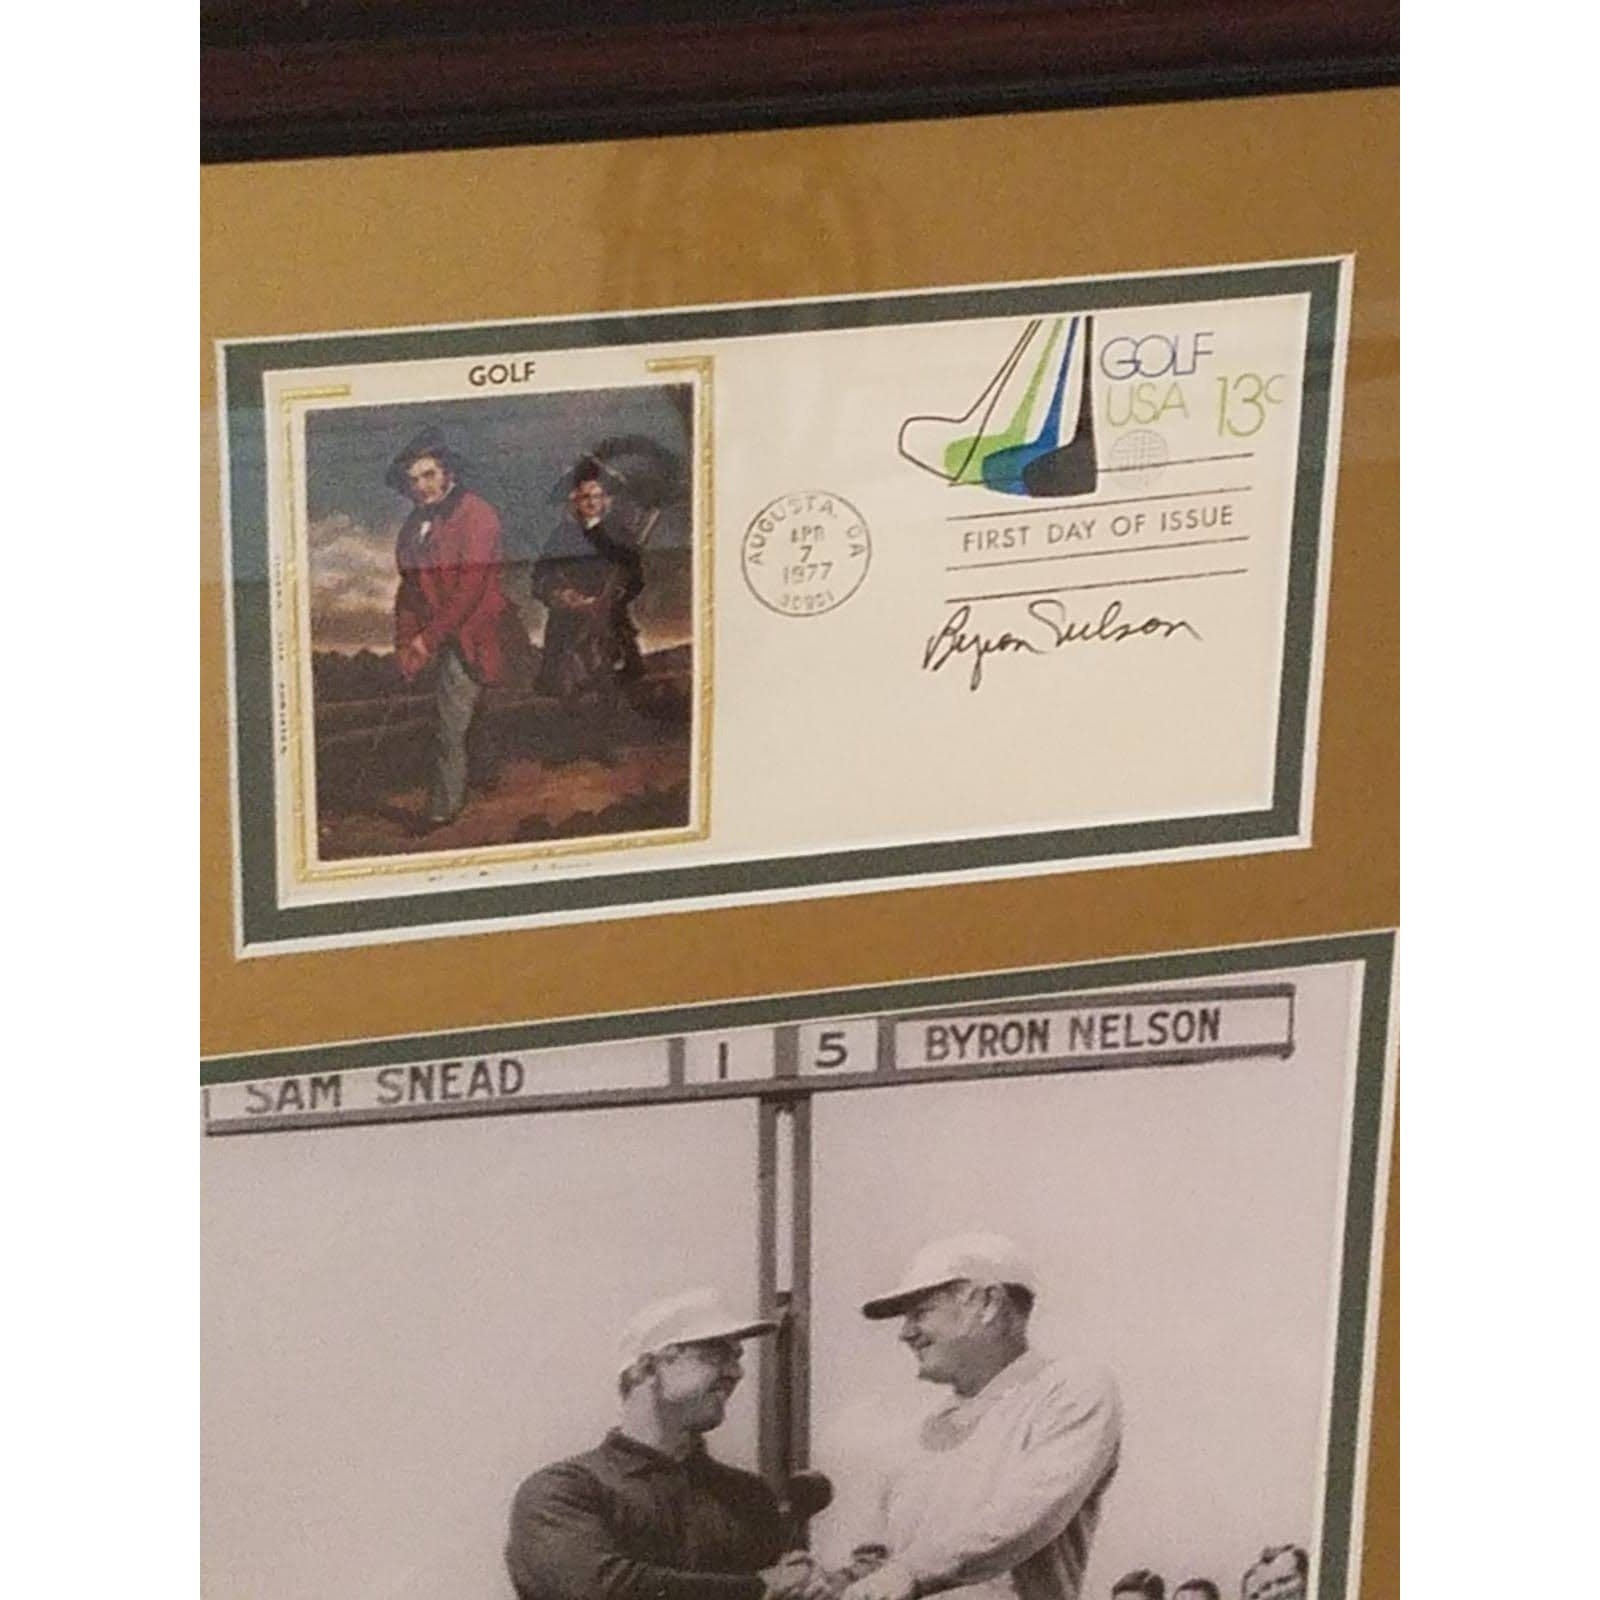 Sam Snead and Byron Nelson Signed and Framed